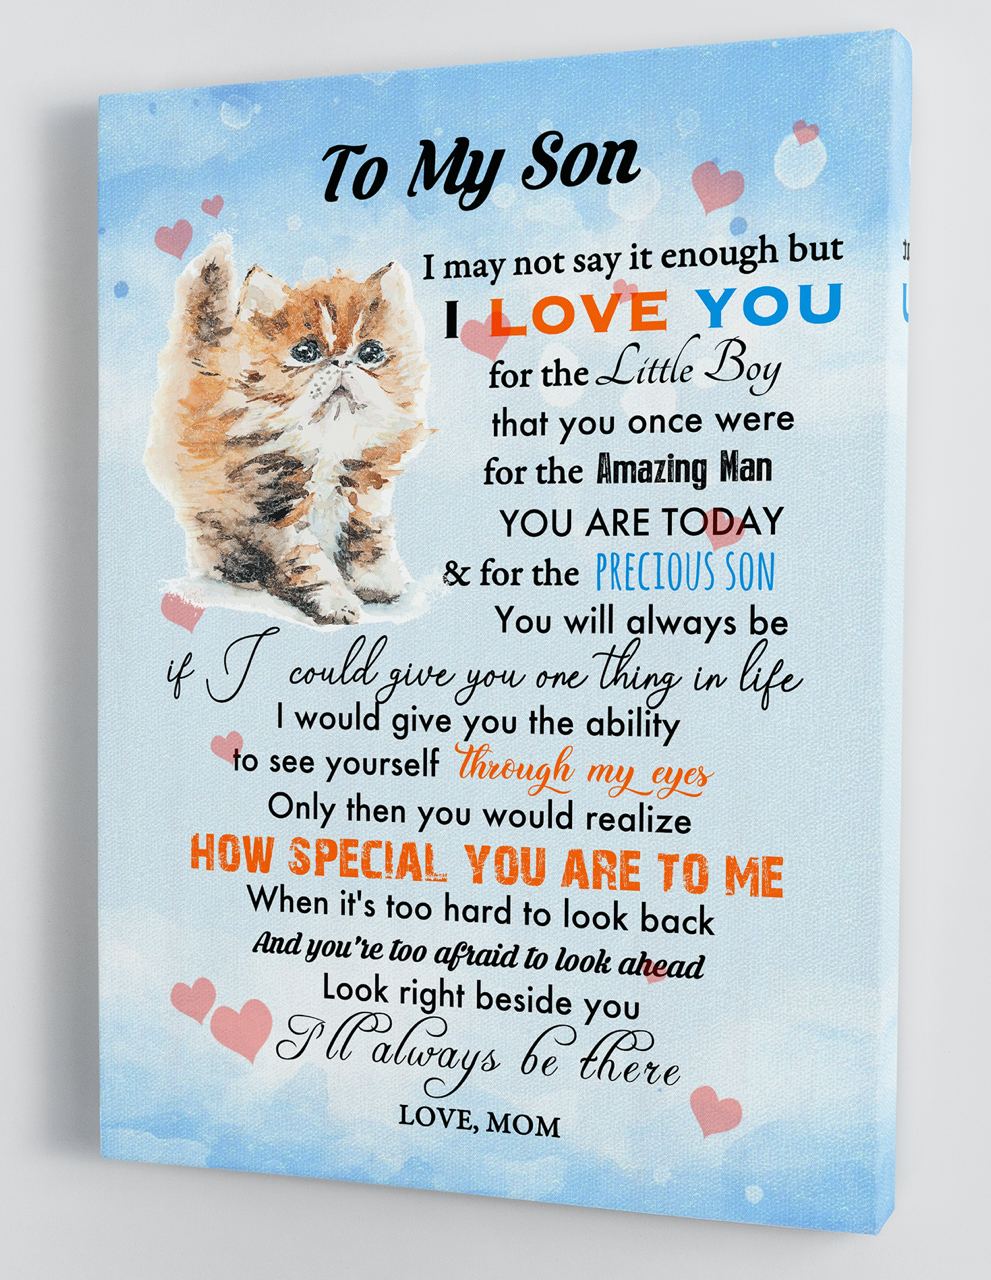 Gifts for Son - From Mom - Framed Canvas Gift MS077